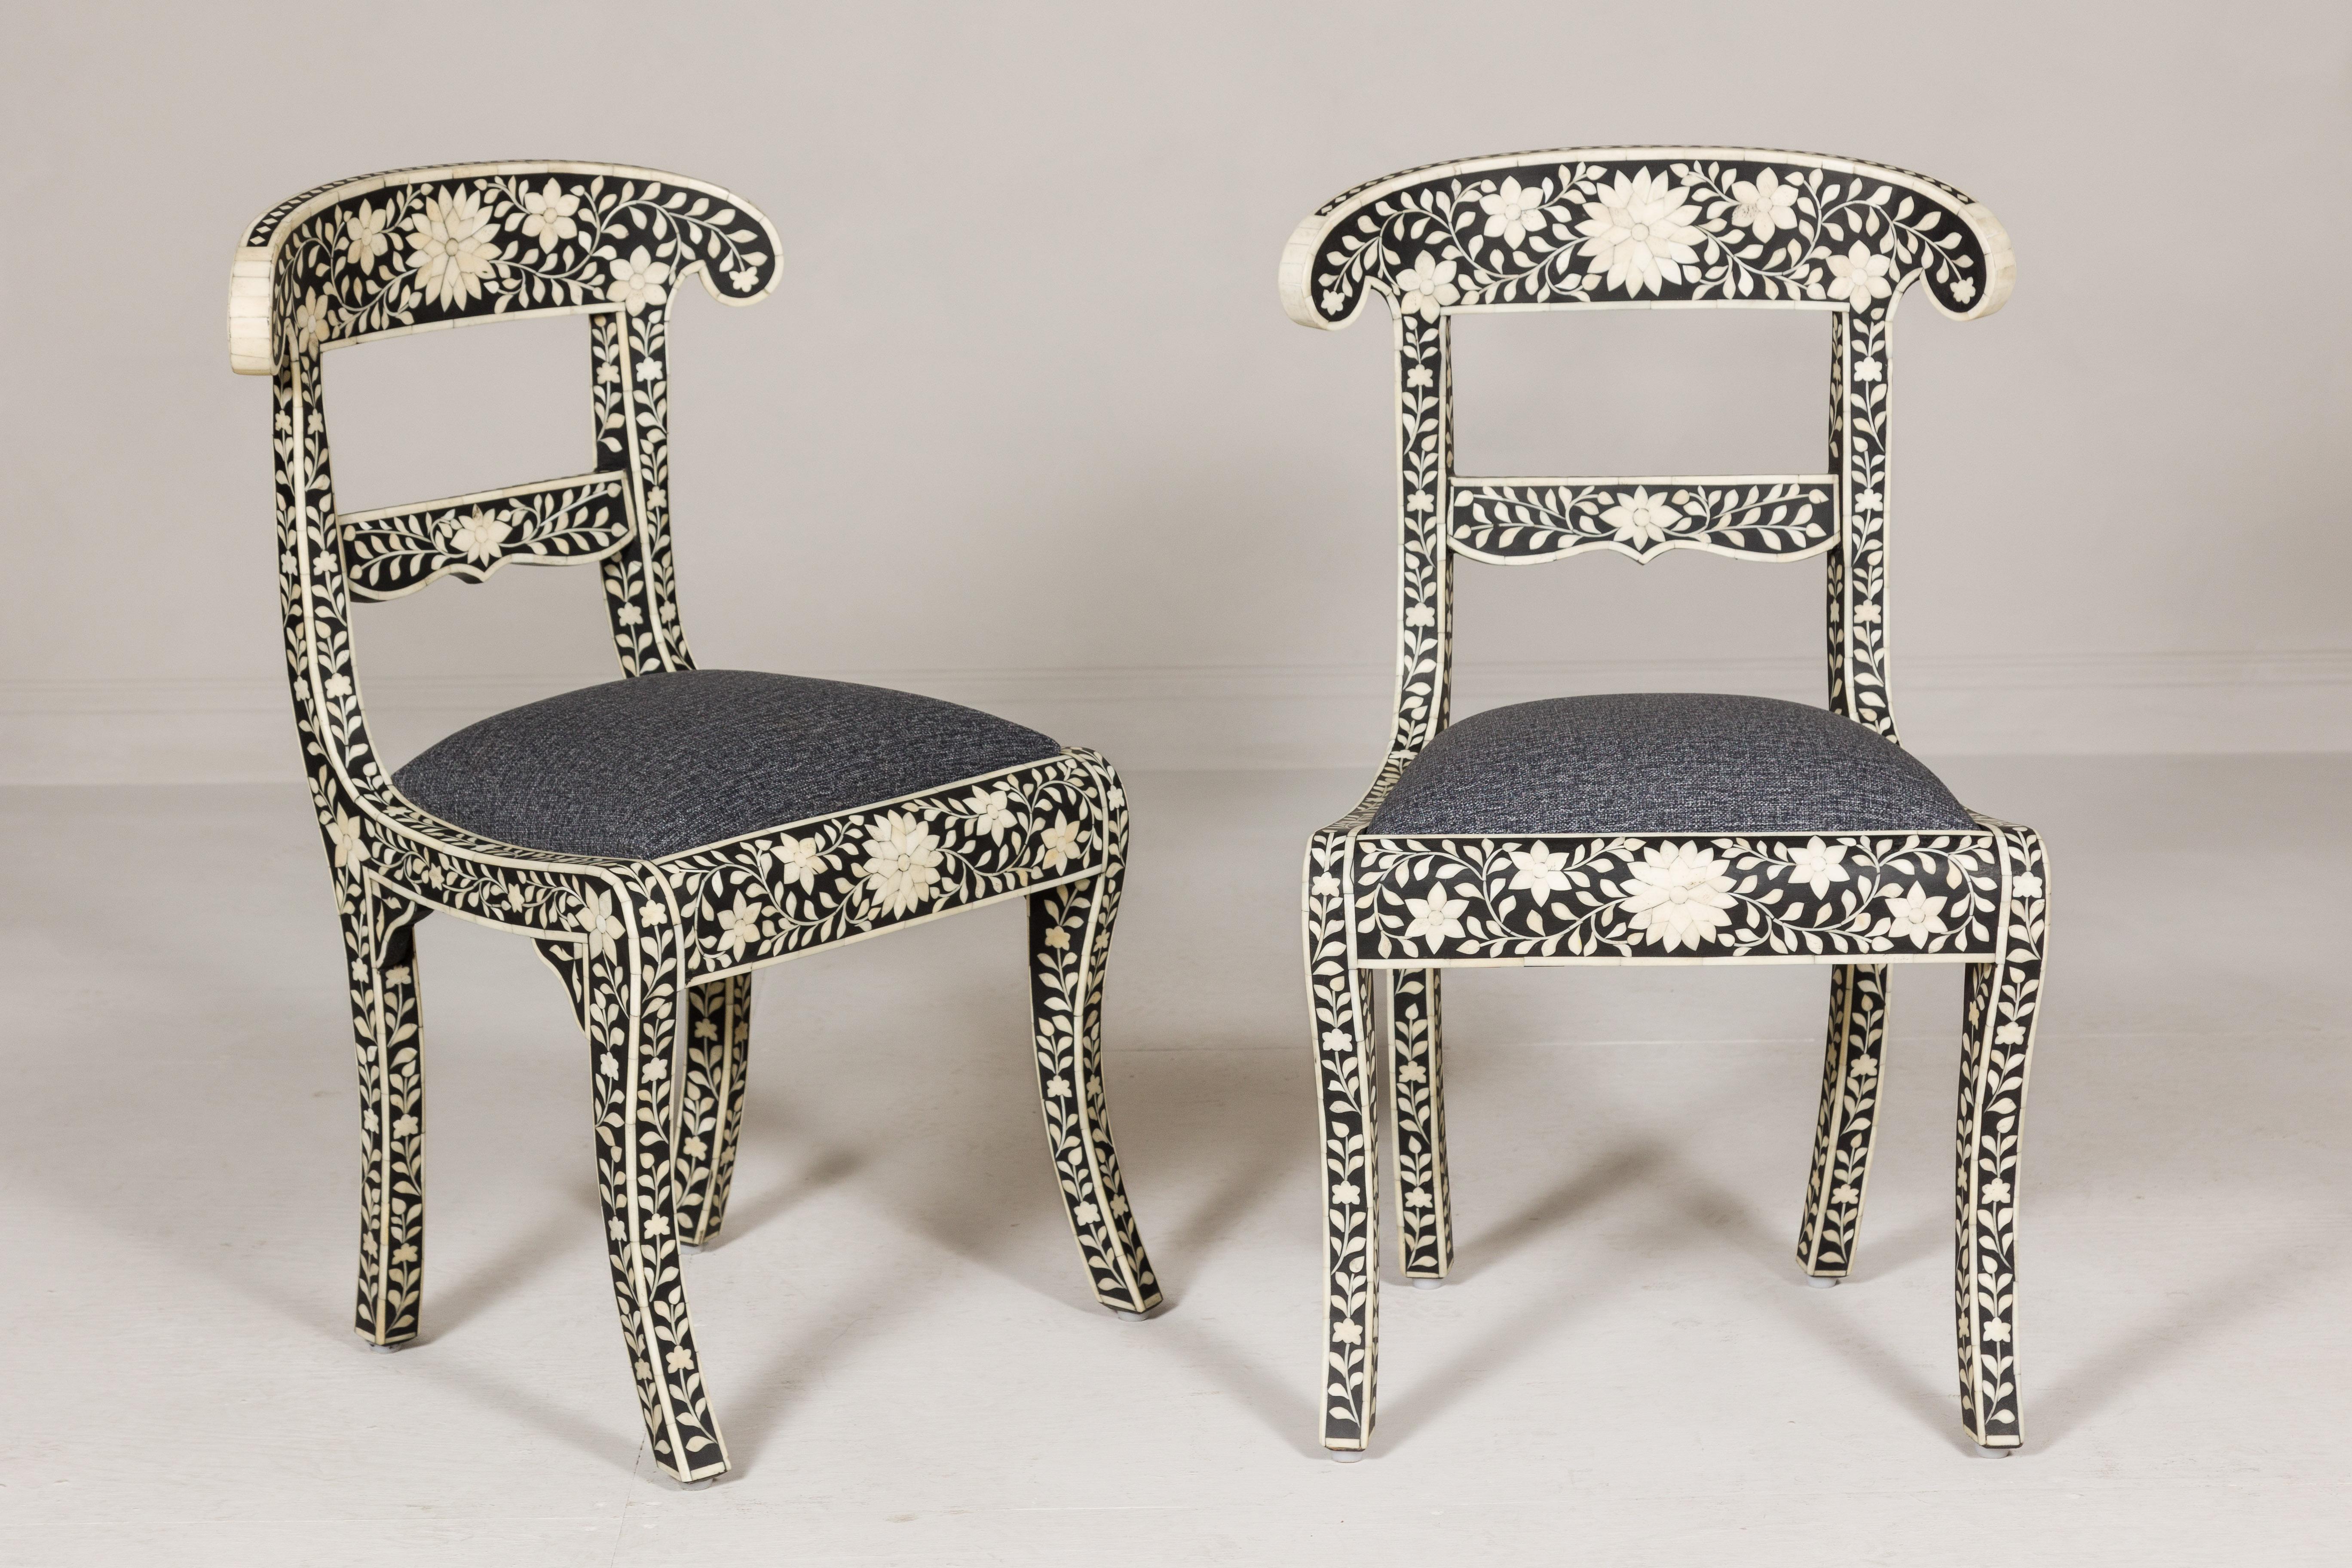 A pair of Anglo-Indian style mango wood side chairs with floral-themed bone inlaid décor, dark grey fabric and saber legs. Unveil a fusion of Eastern allure and Western design with this pair of Anglo-Indian style mango wood side chairs. Nestled